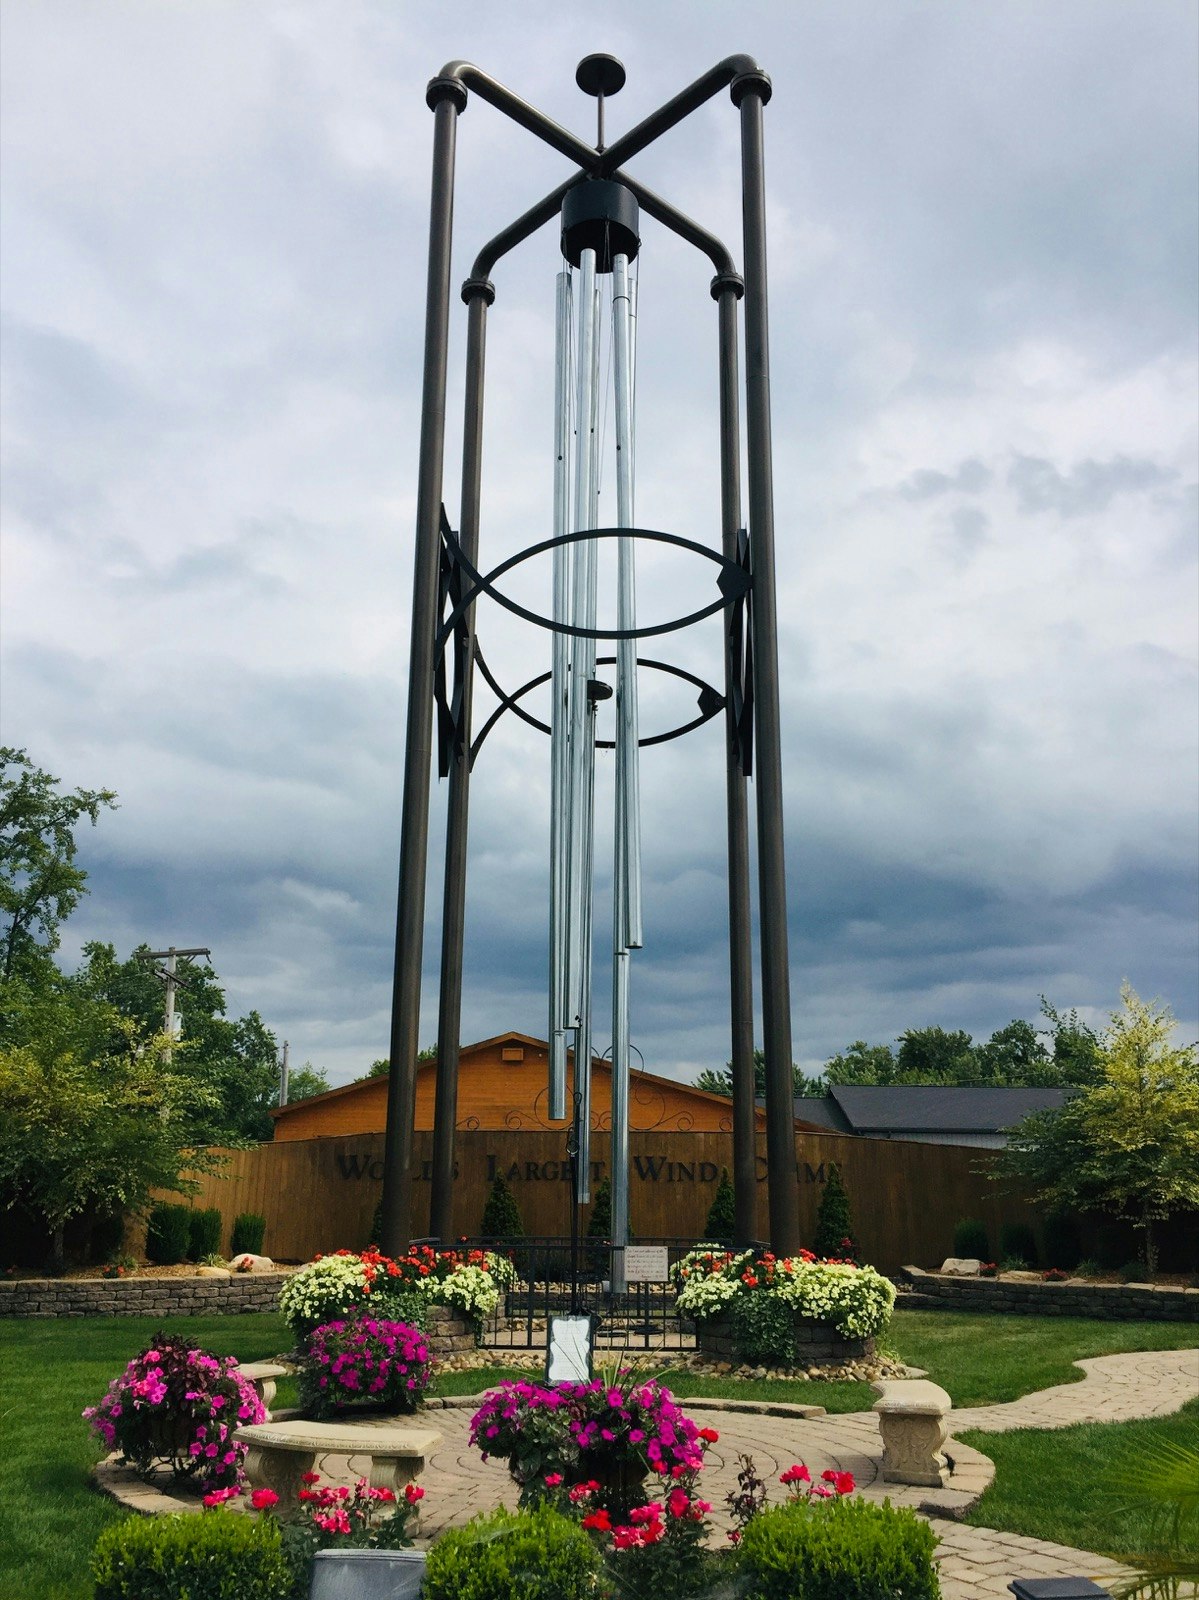 A large windchime stands over pots of flowers, with dark clouds in the sky beyond; midwest travel ideas